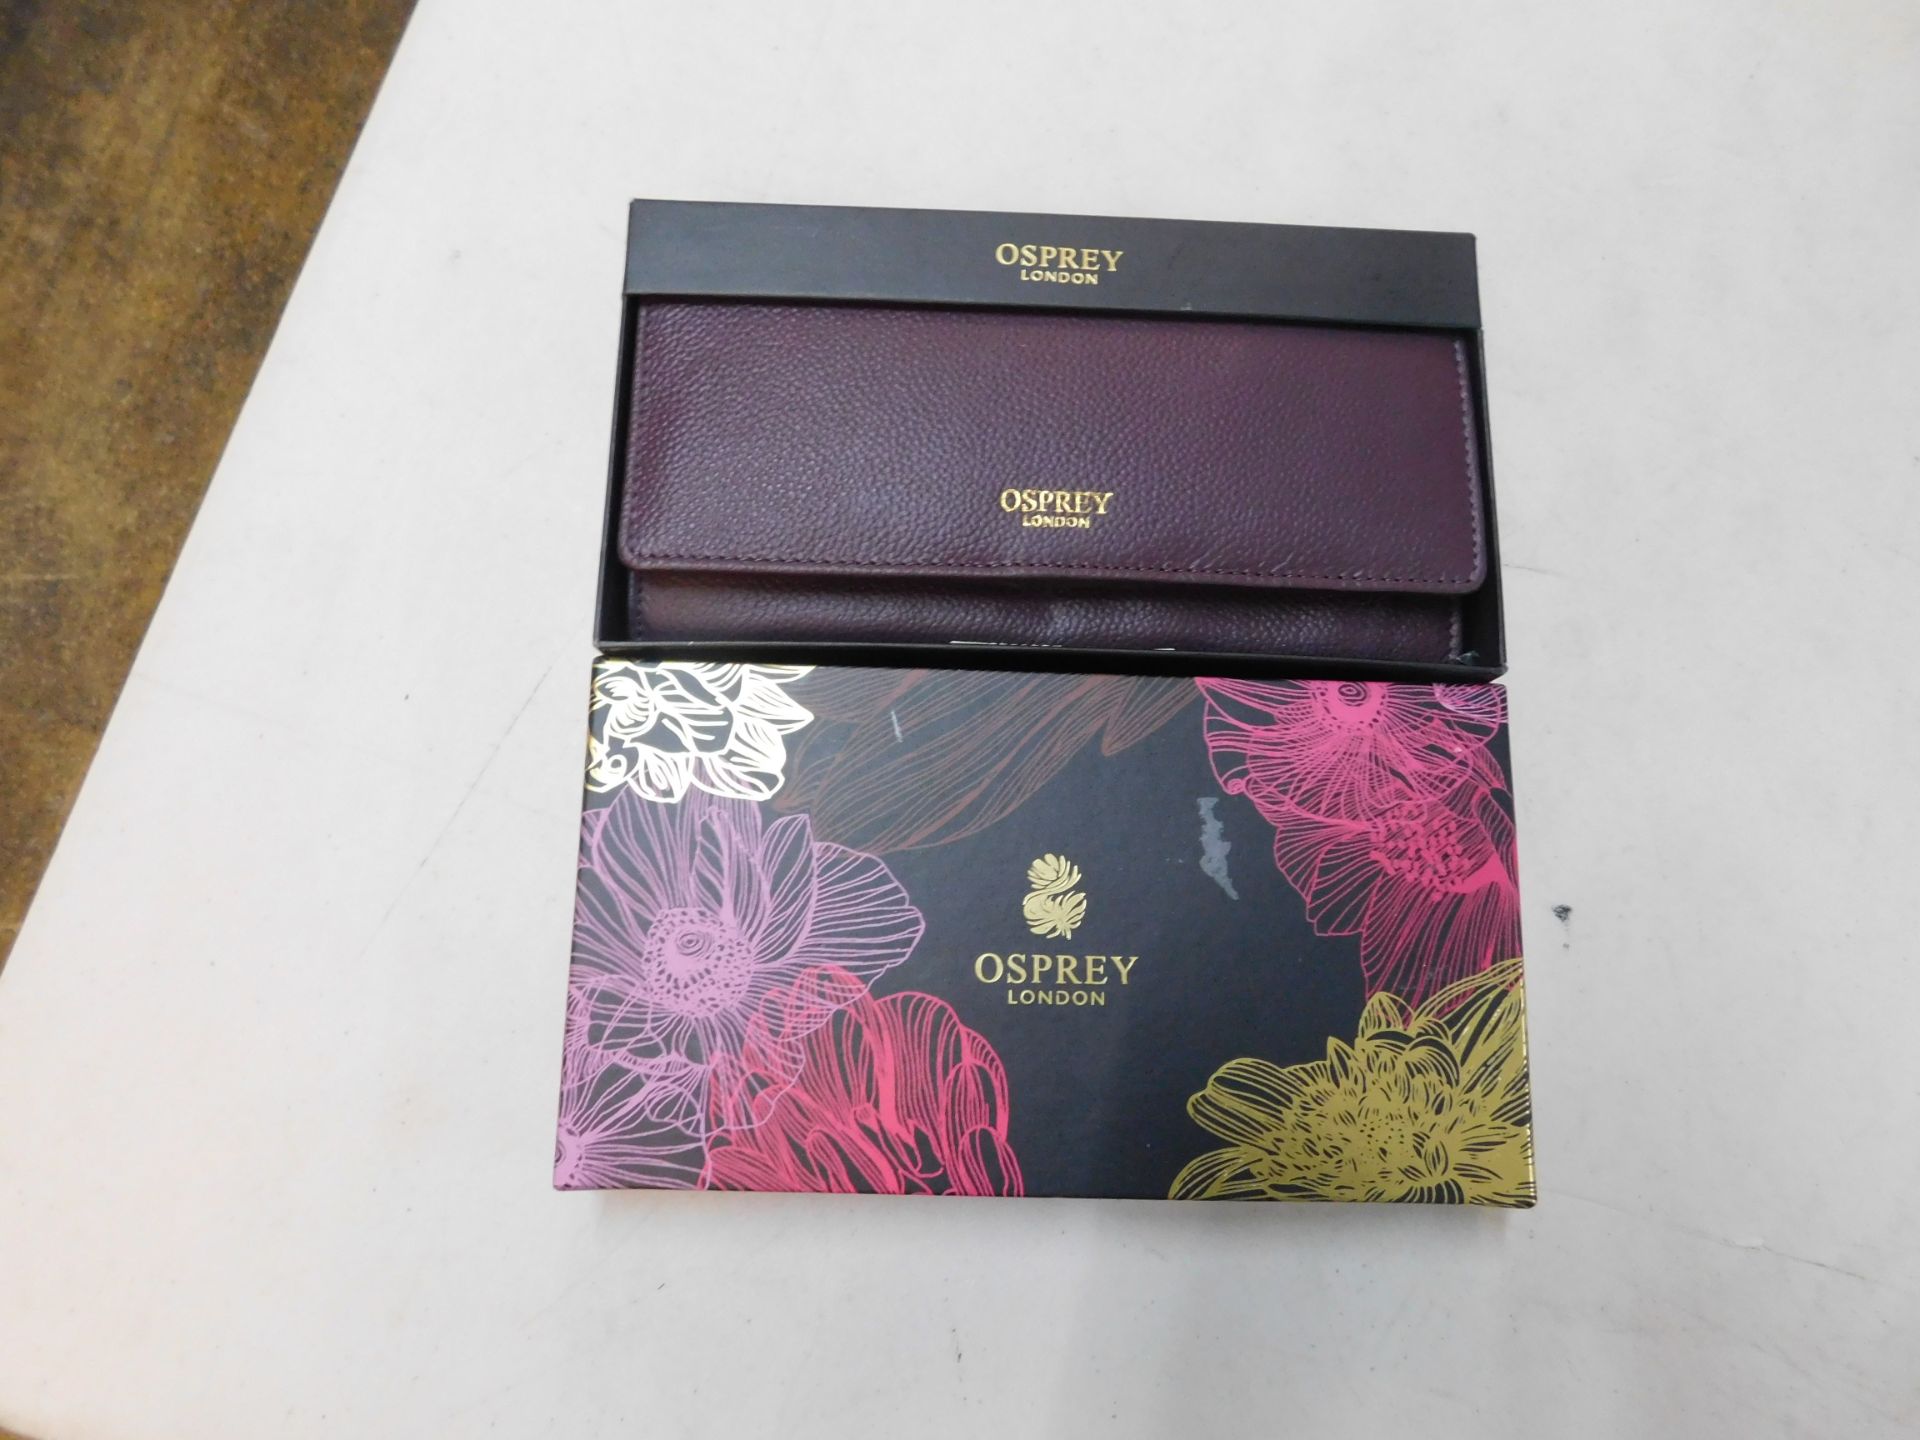 1 BOXED OSPREY LONDON WOMENS LEATHER MATINEE PURSE WALLET RRP Â£34.99